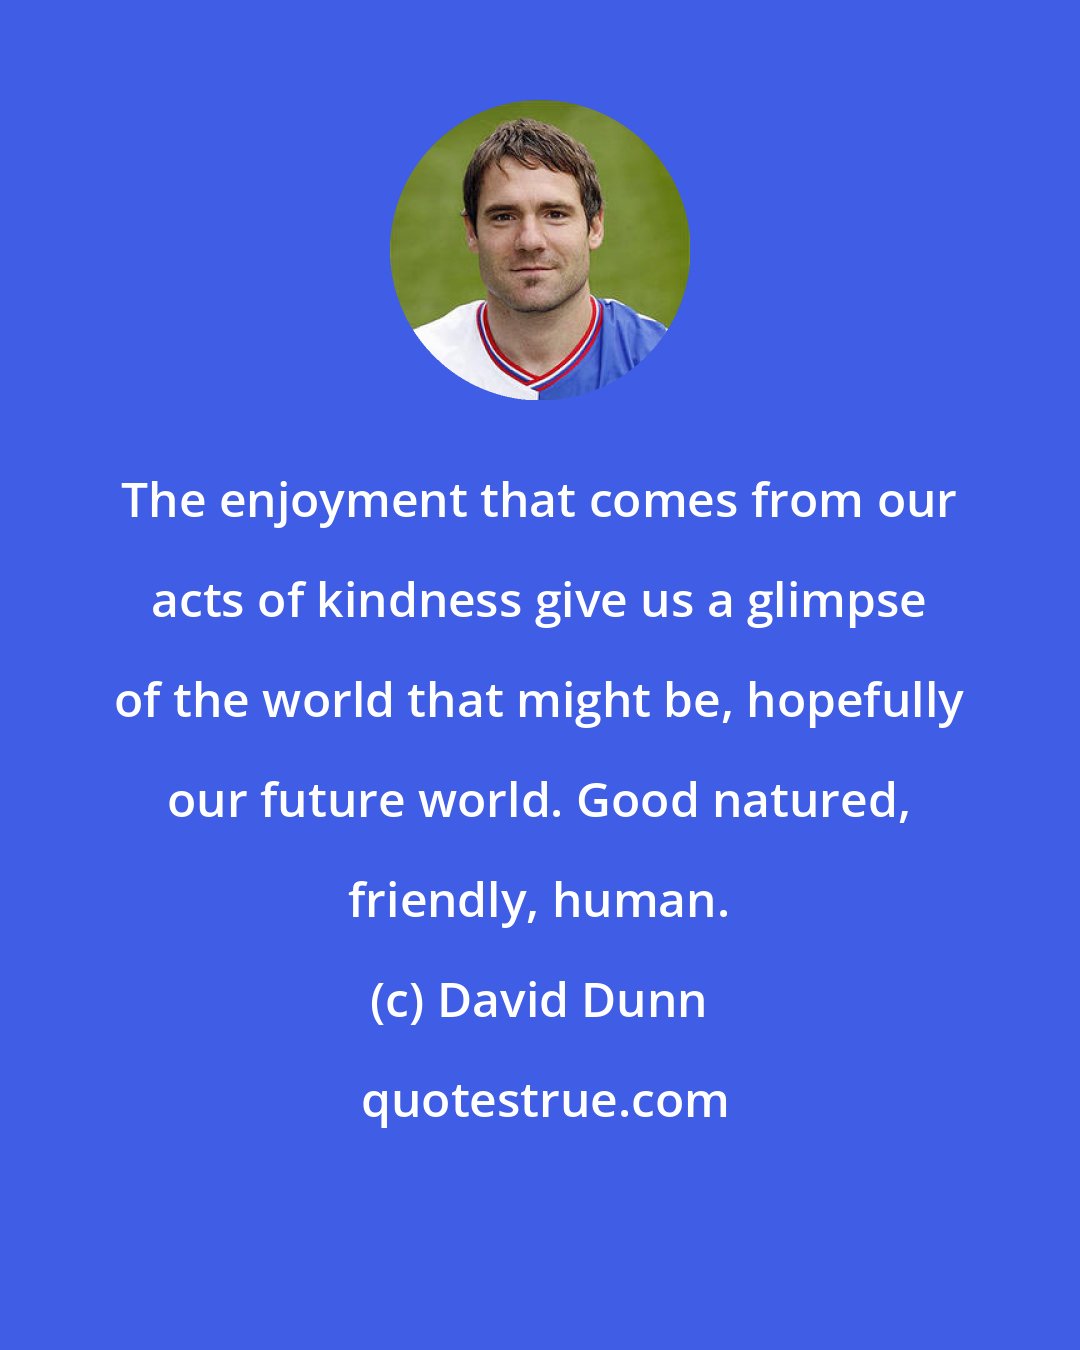 David Dunn: The enjoyment that comes from our acts of kindness give us a glimpse of the world that might be, hopefully our future world. Good natured, friendly, human.